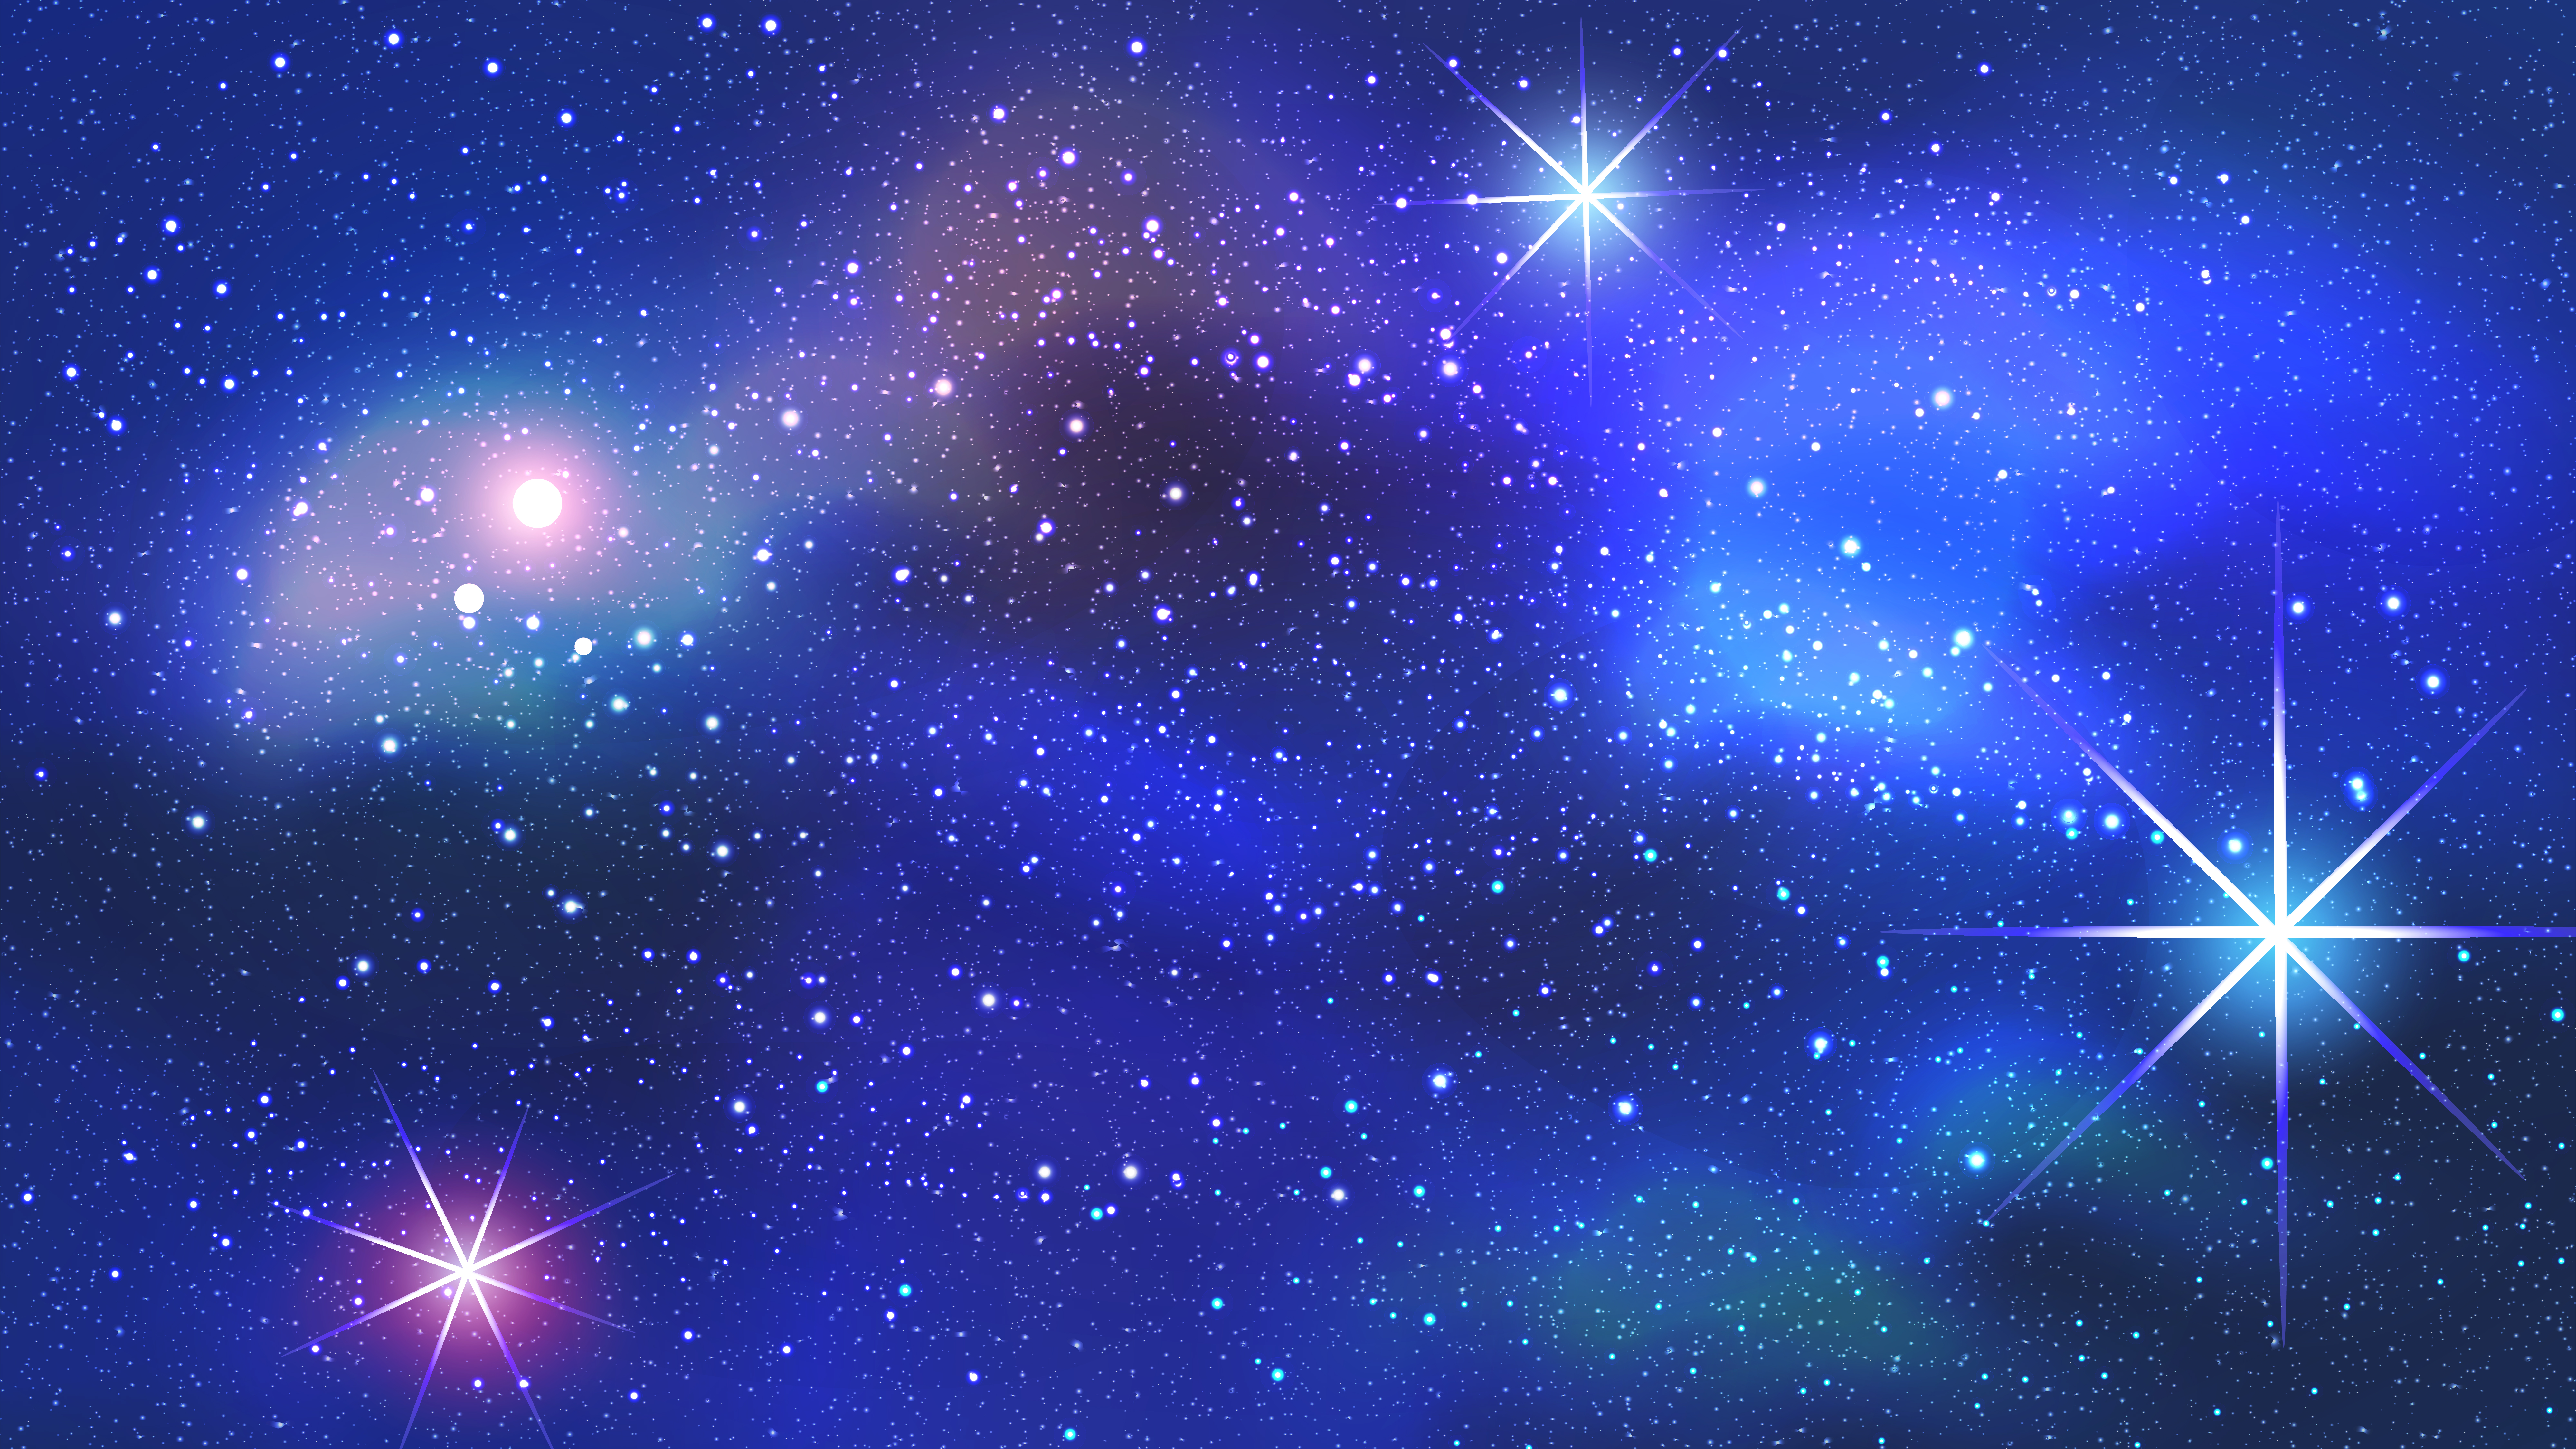 Space star designs ppt background #4023